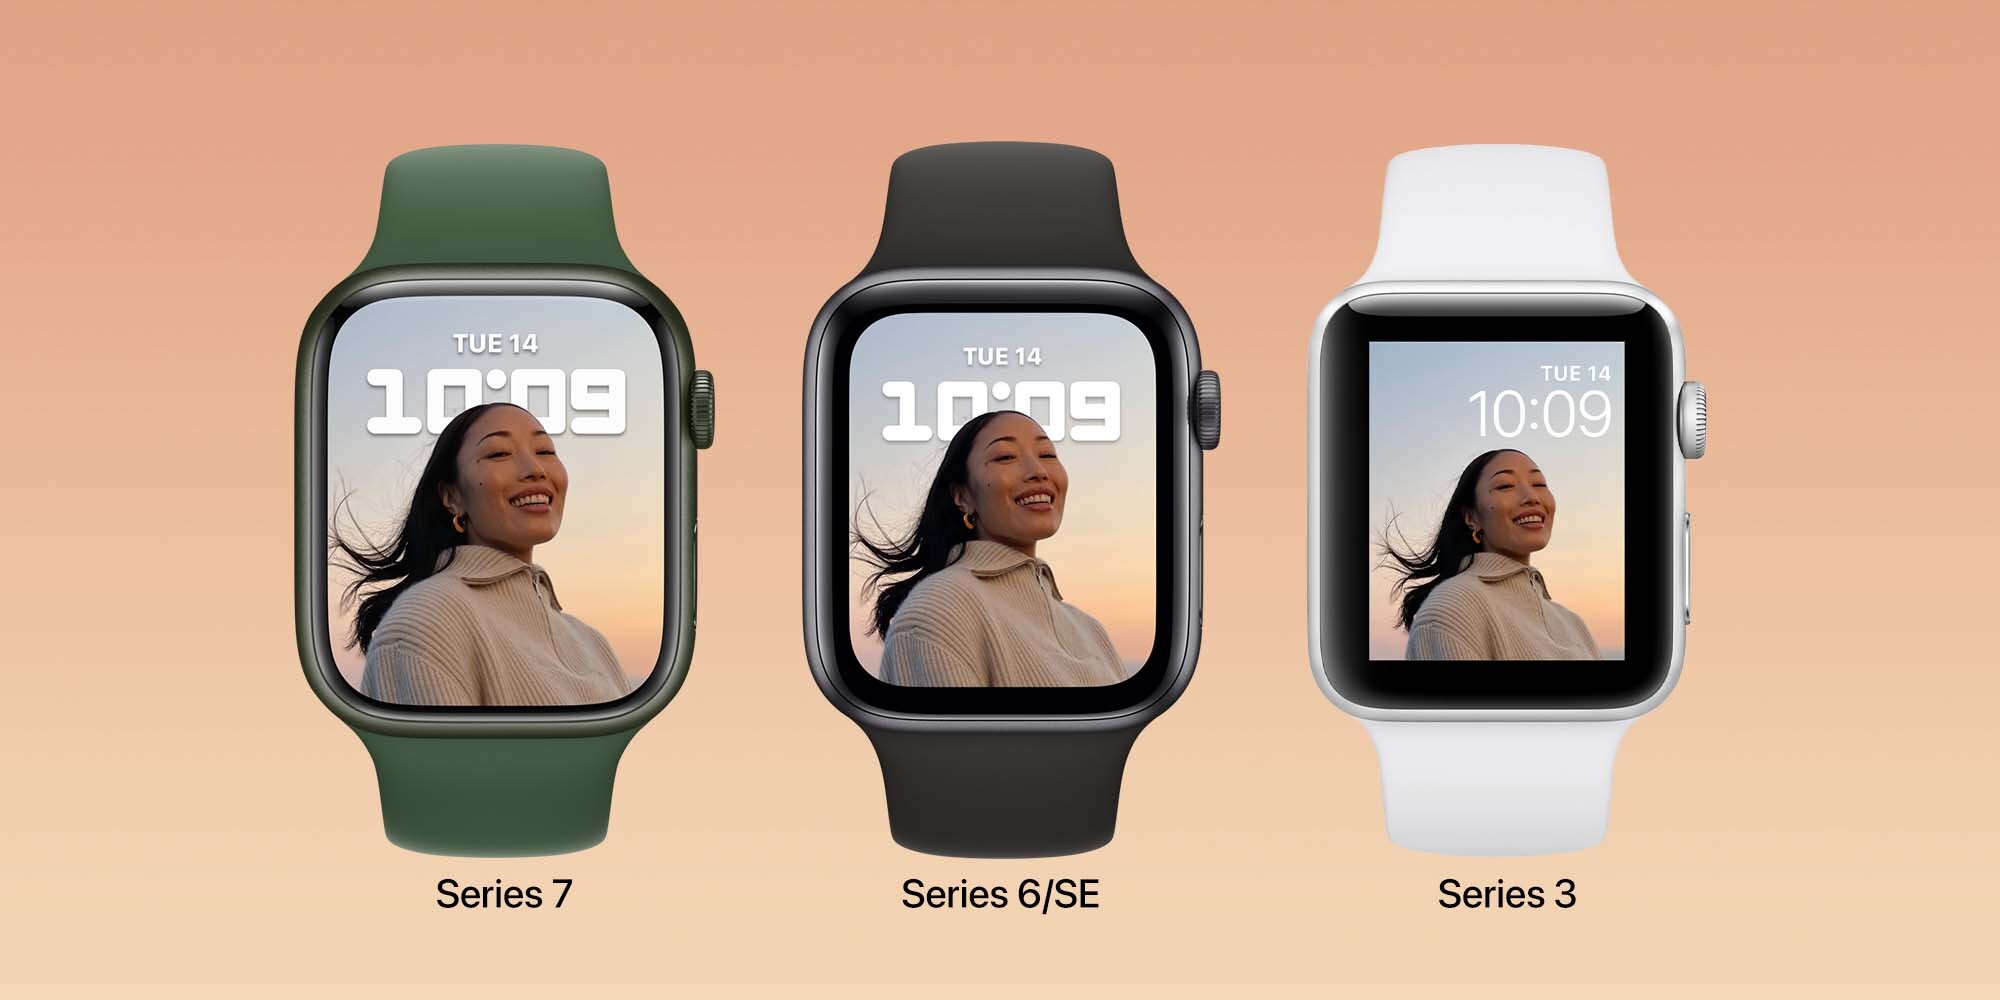 https://9to5mac.com/wp-content/uploads/sites/6/2022/05/apple-watch-se-vs-7-display.jpg?quality=82&strip=all